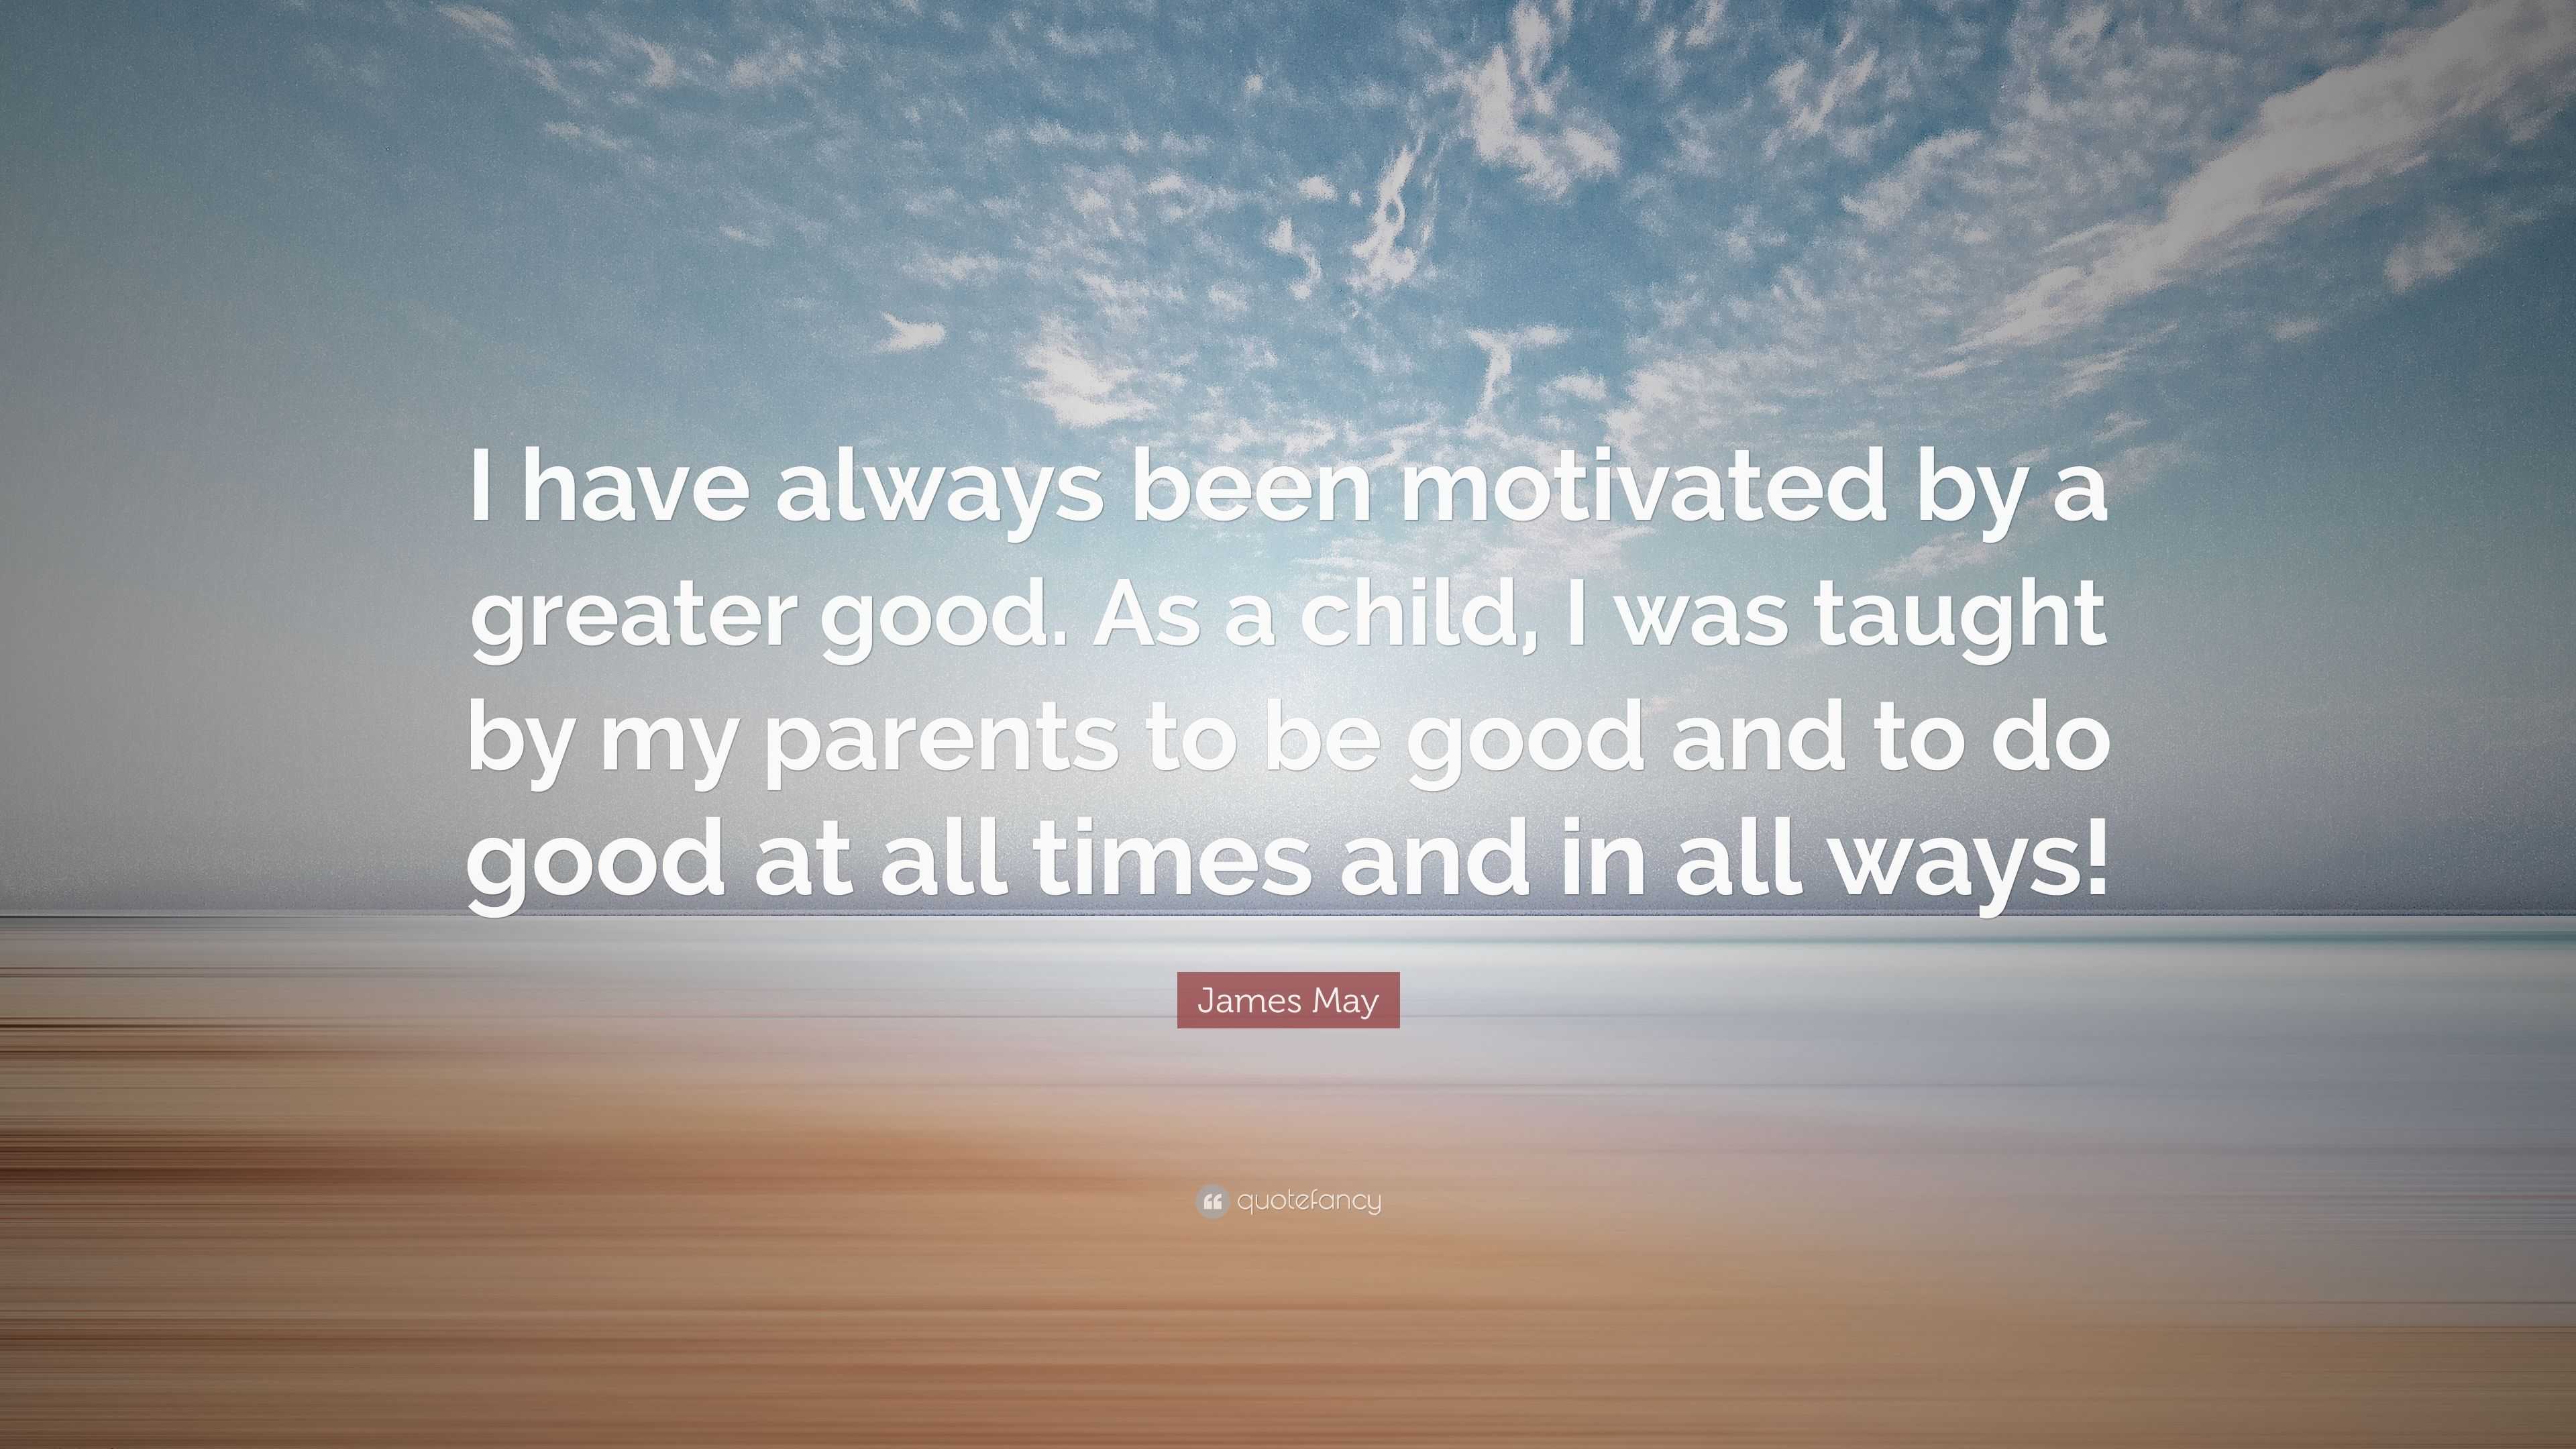 James May Quote: "I have always been motivated by a greater good. As a child, I was taught by my ...